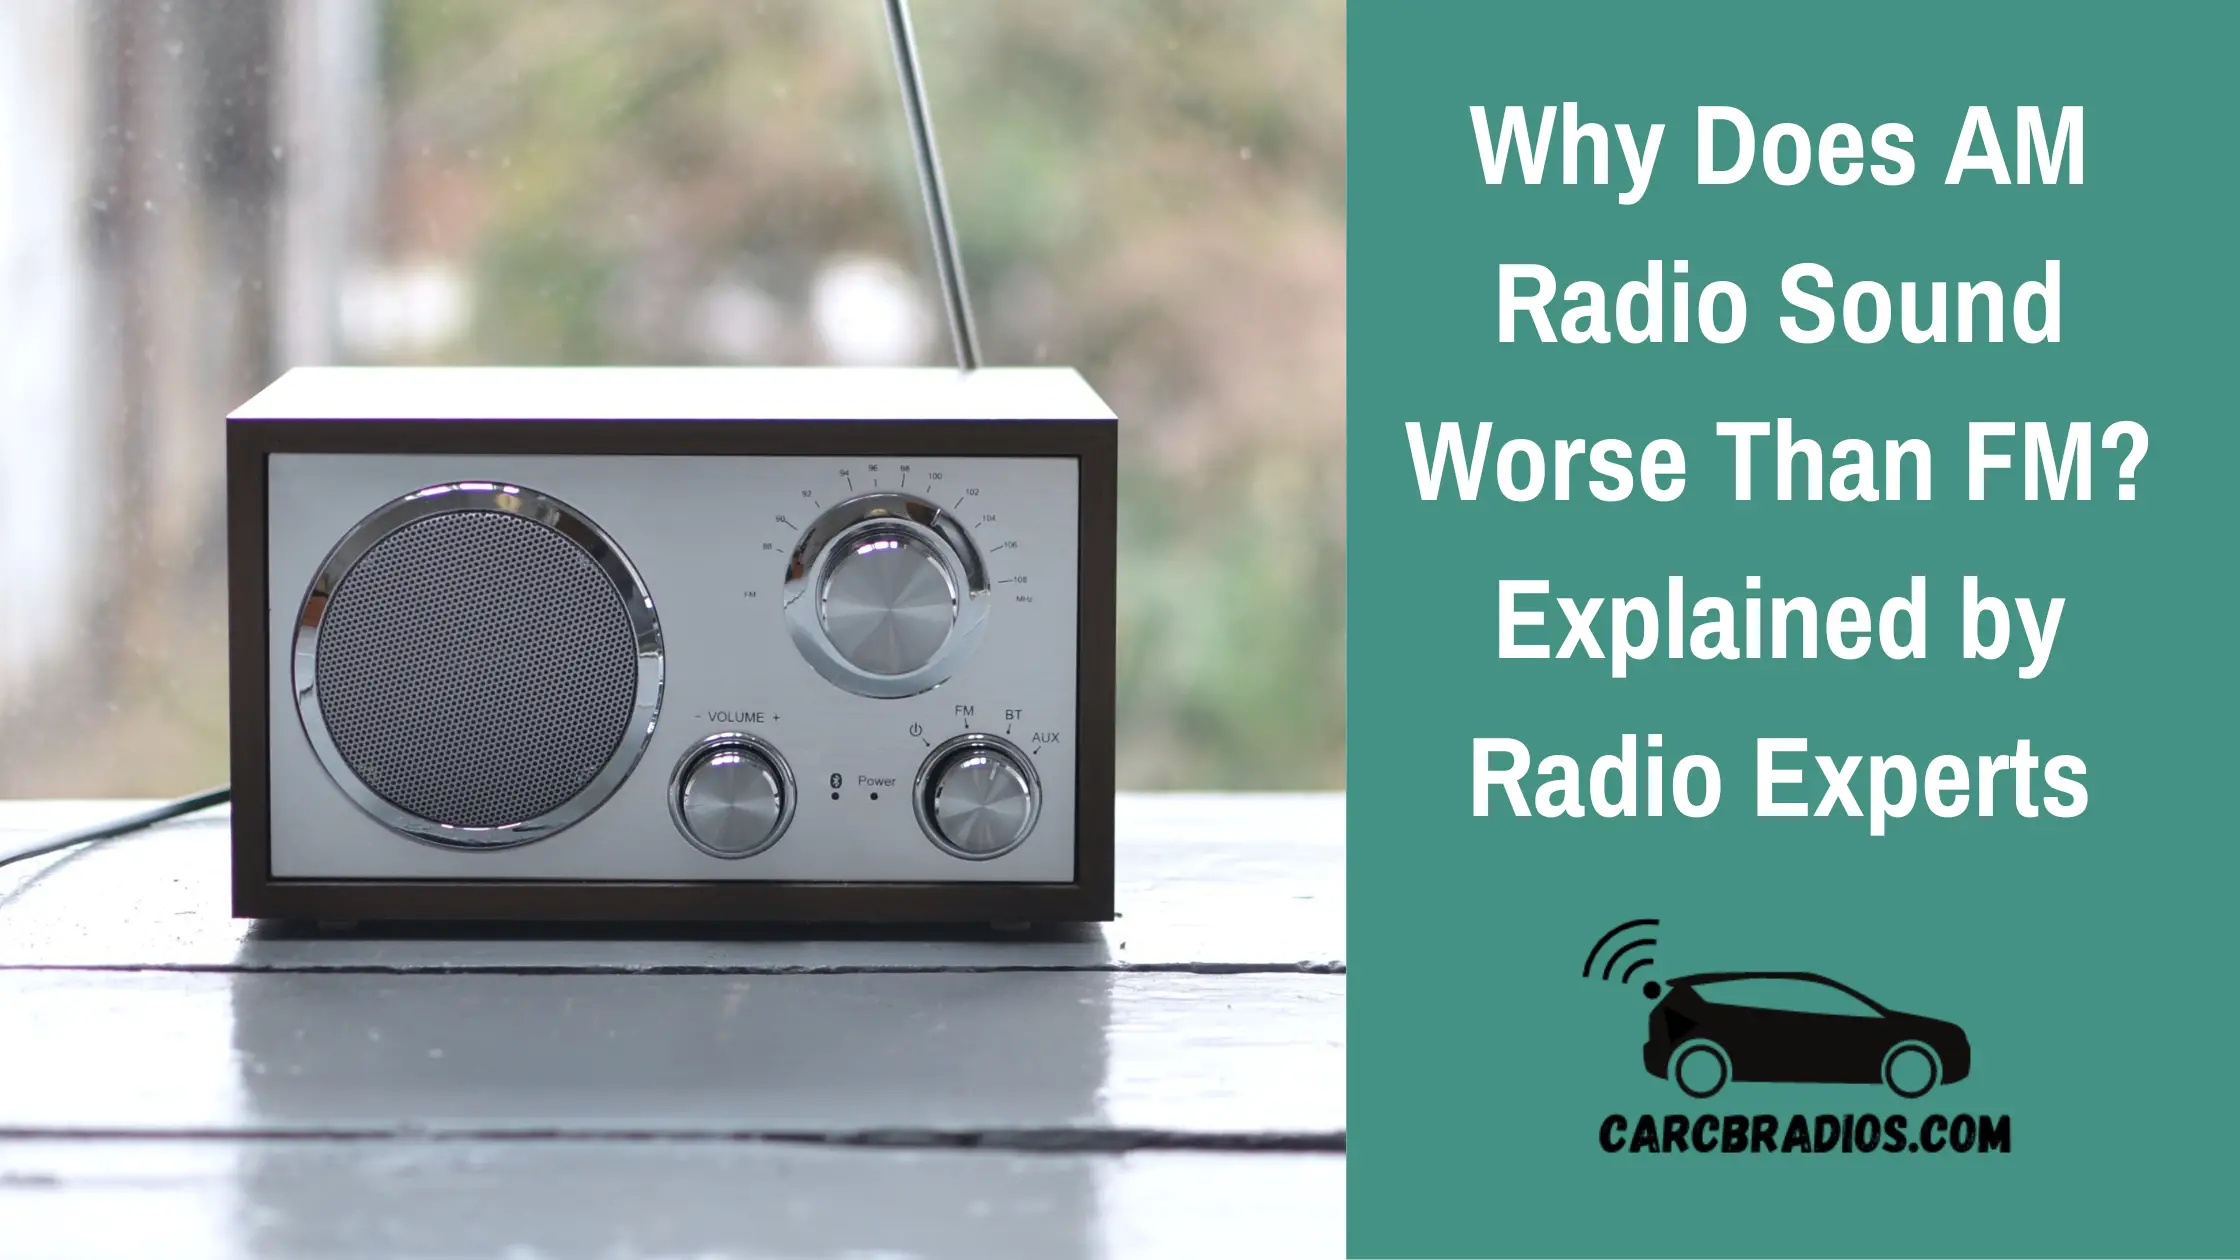 In this article, I will explore the possible causes of low-quality AM radio and present some solutions to help you improve your listening experience. From listening during the day or night, to having too many electronics running, to not using an external antenna, there are several factors that can affect the sound quality of your AM radio. Keep reading to find out more about these issues and how to fix them.